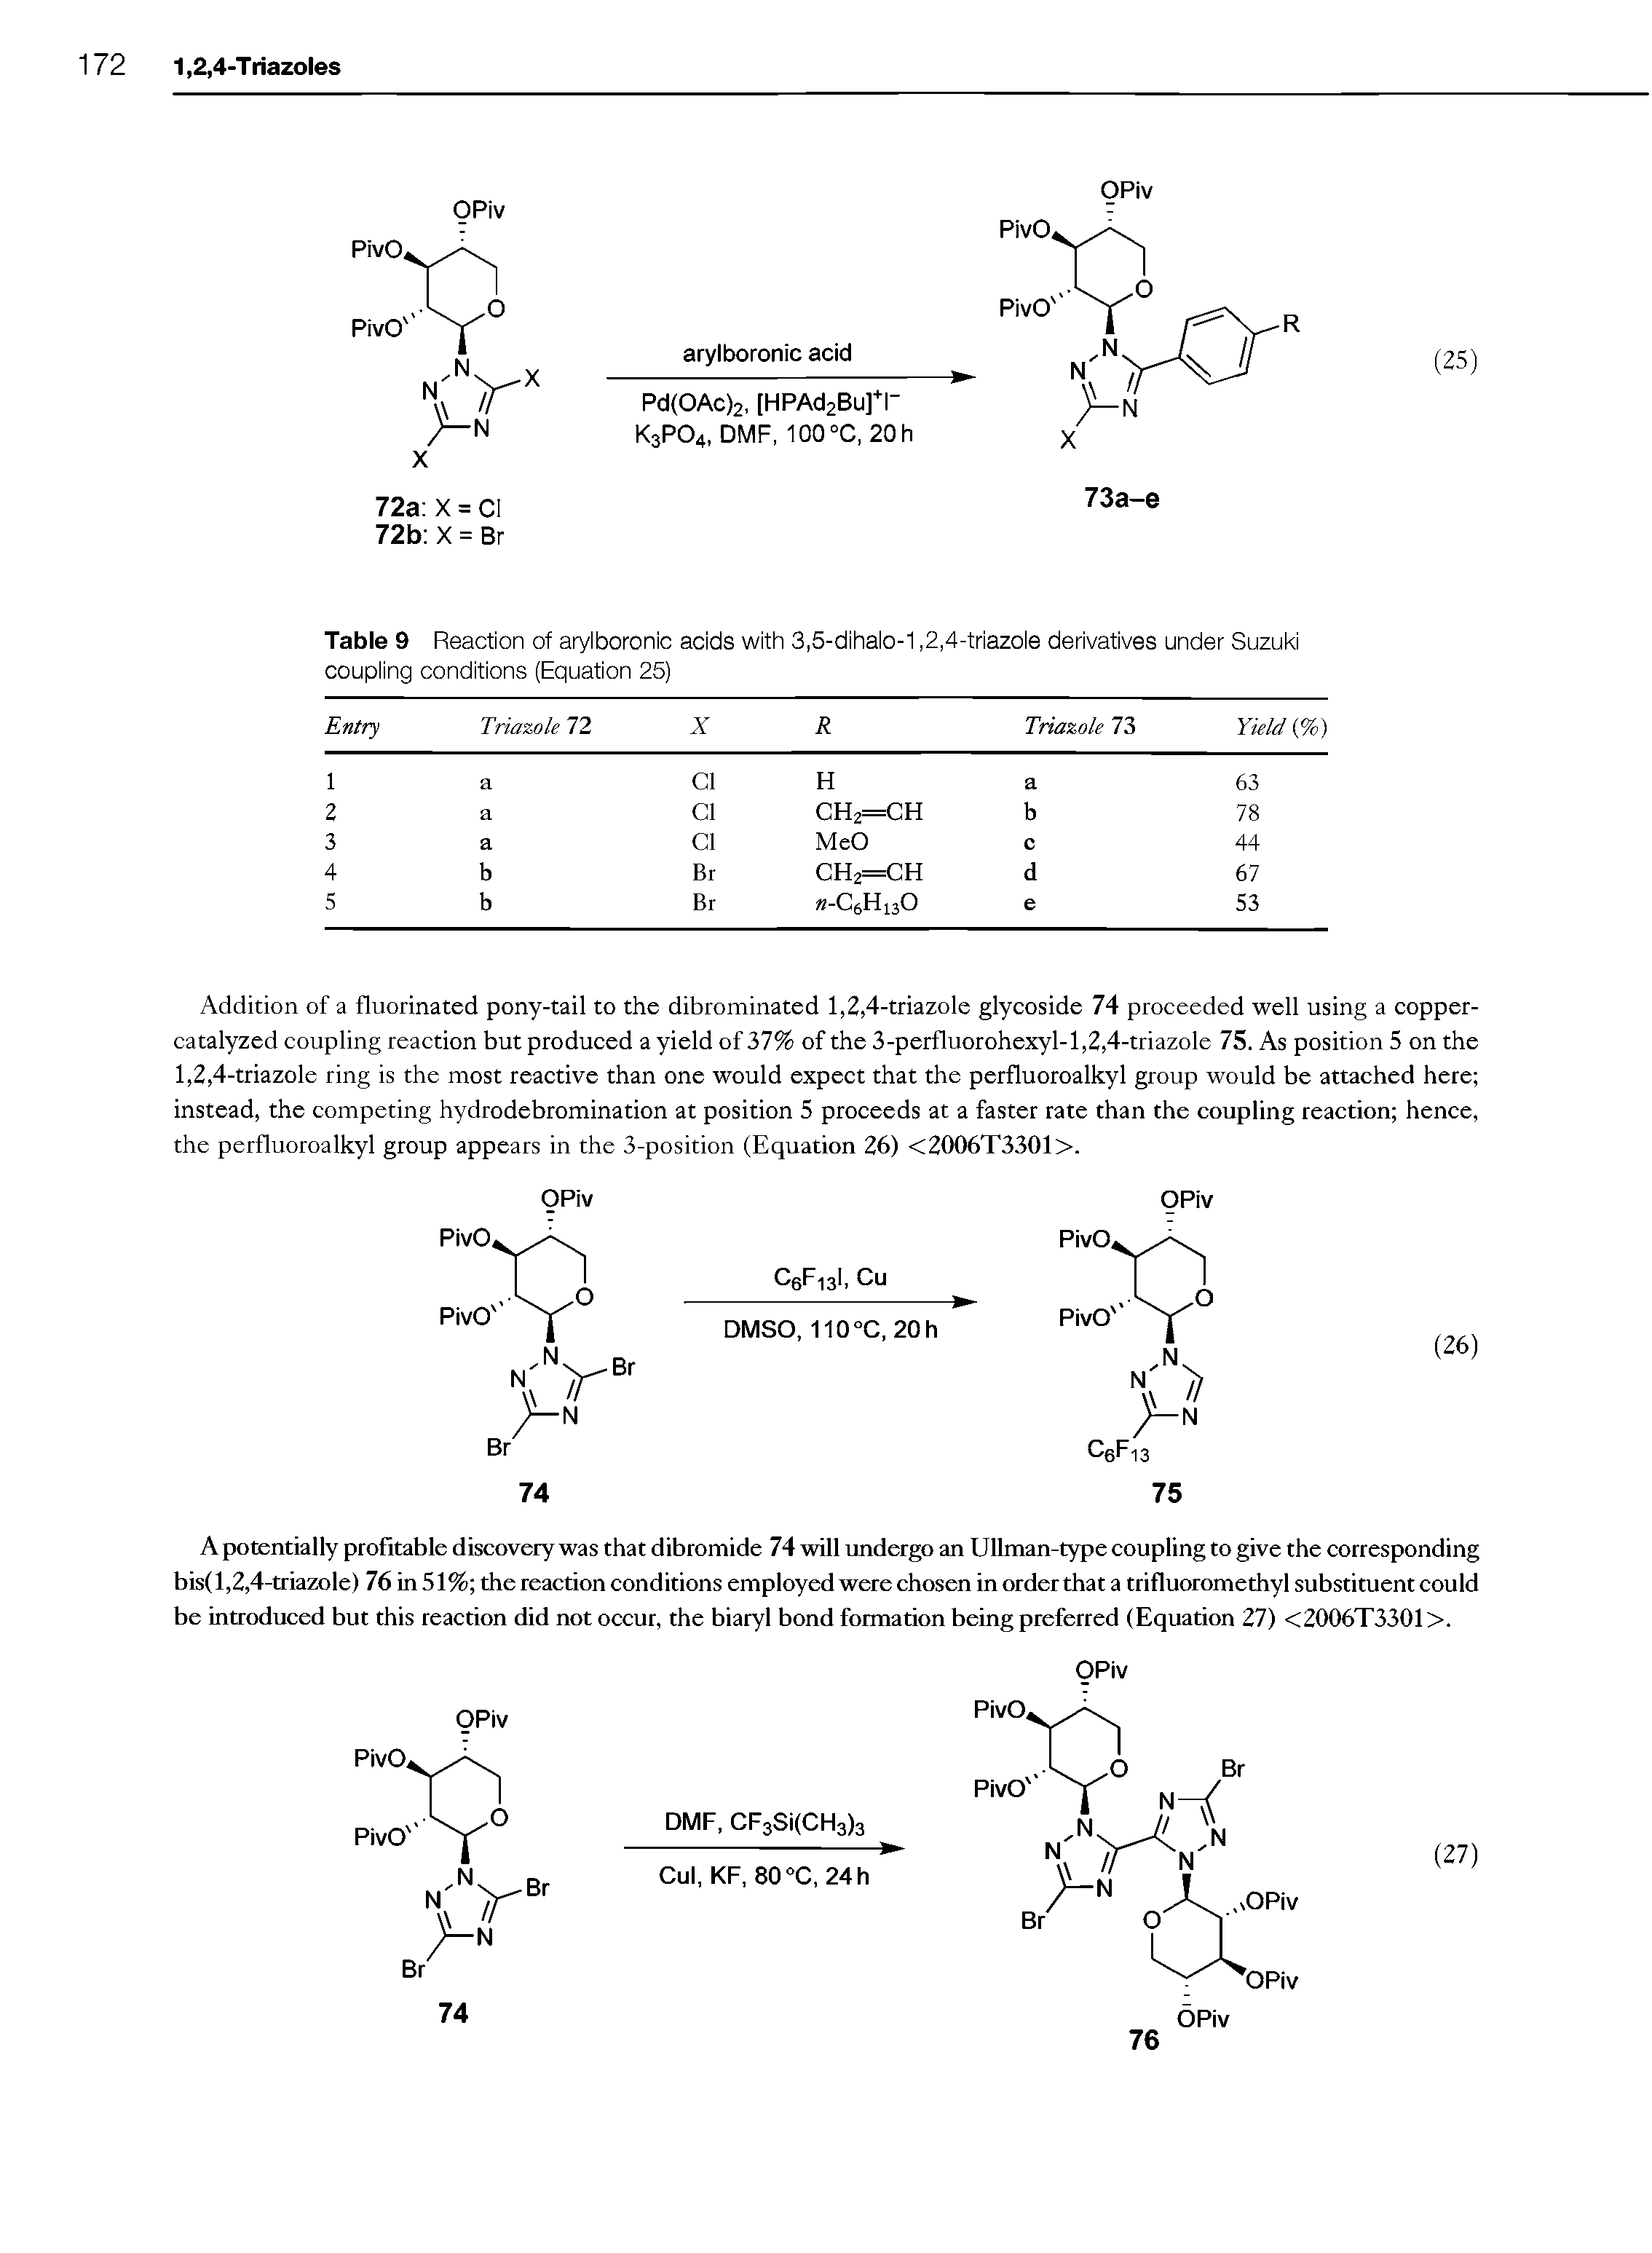 Table 9 Reaction of arylboronic acids with 3,5-dihalo-1,2,4-triazole derivatives under Suzuki coupling conditions (Equation 25)...